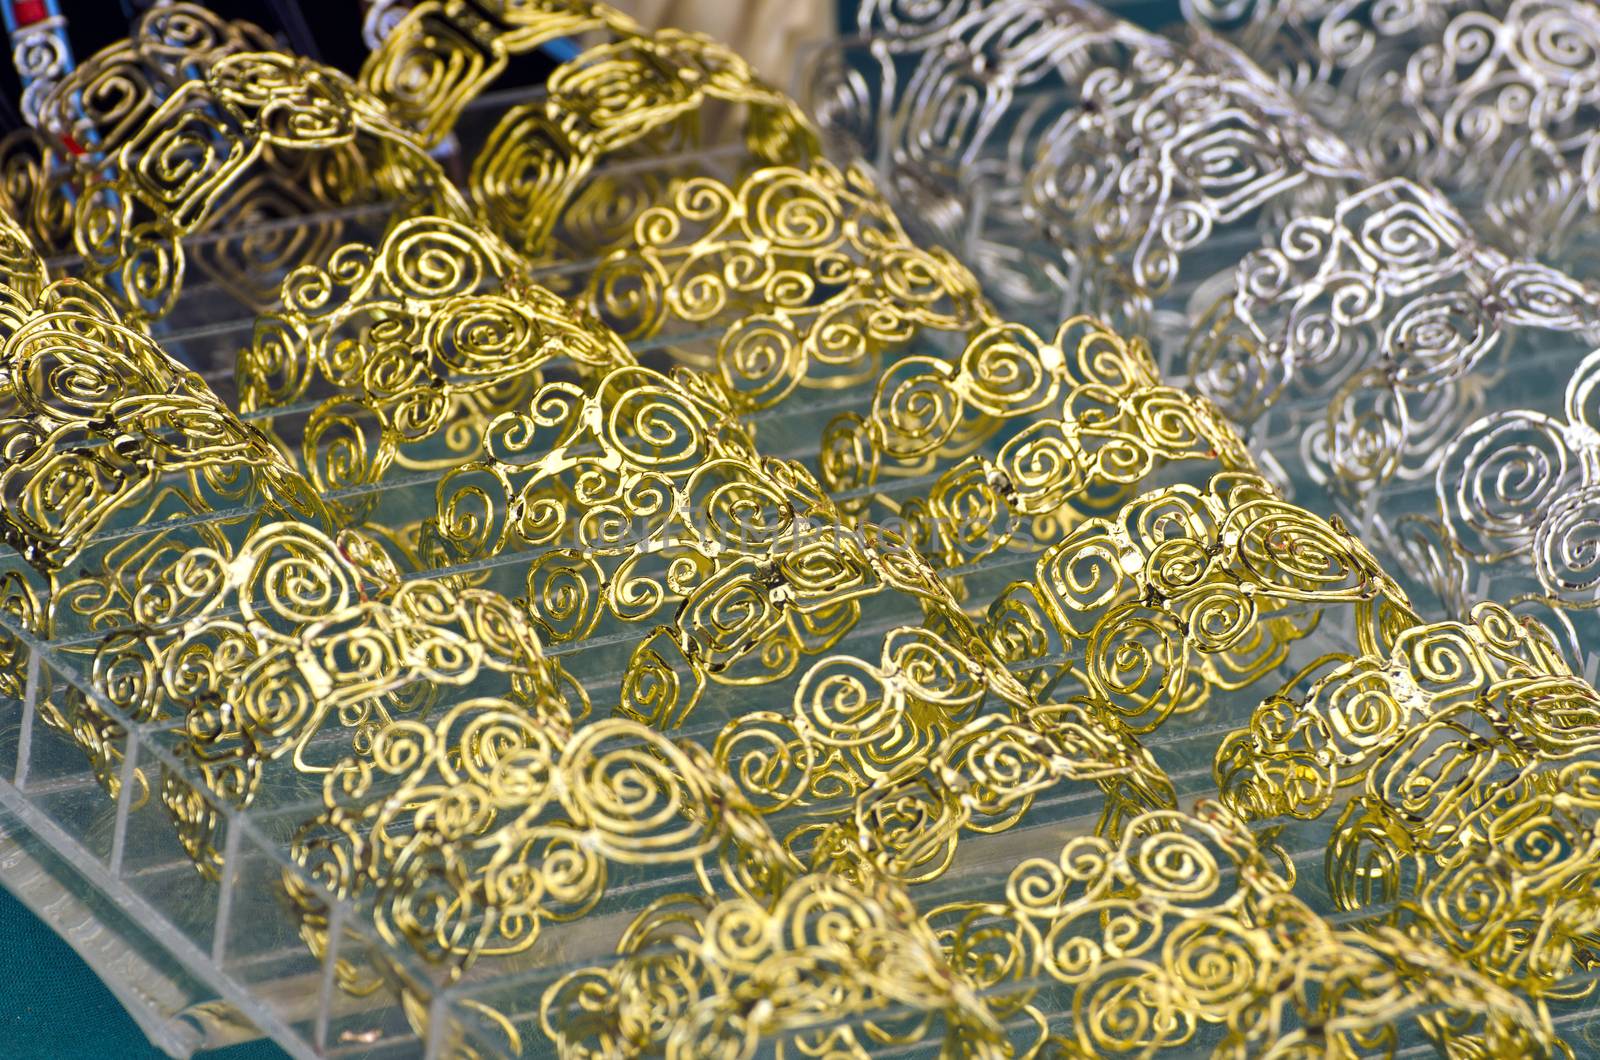 Spiraled ornaments of gold and silver jewelry in market